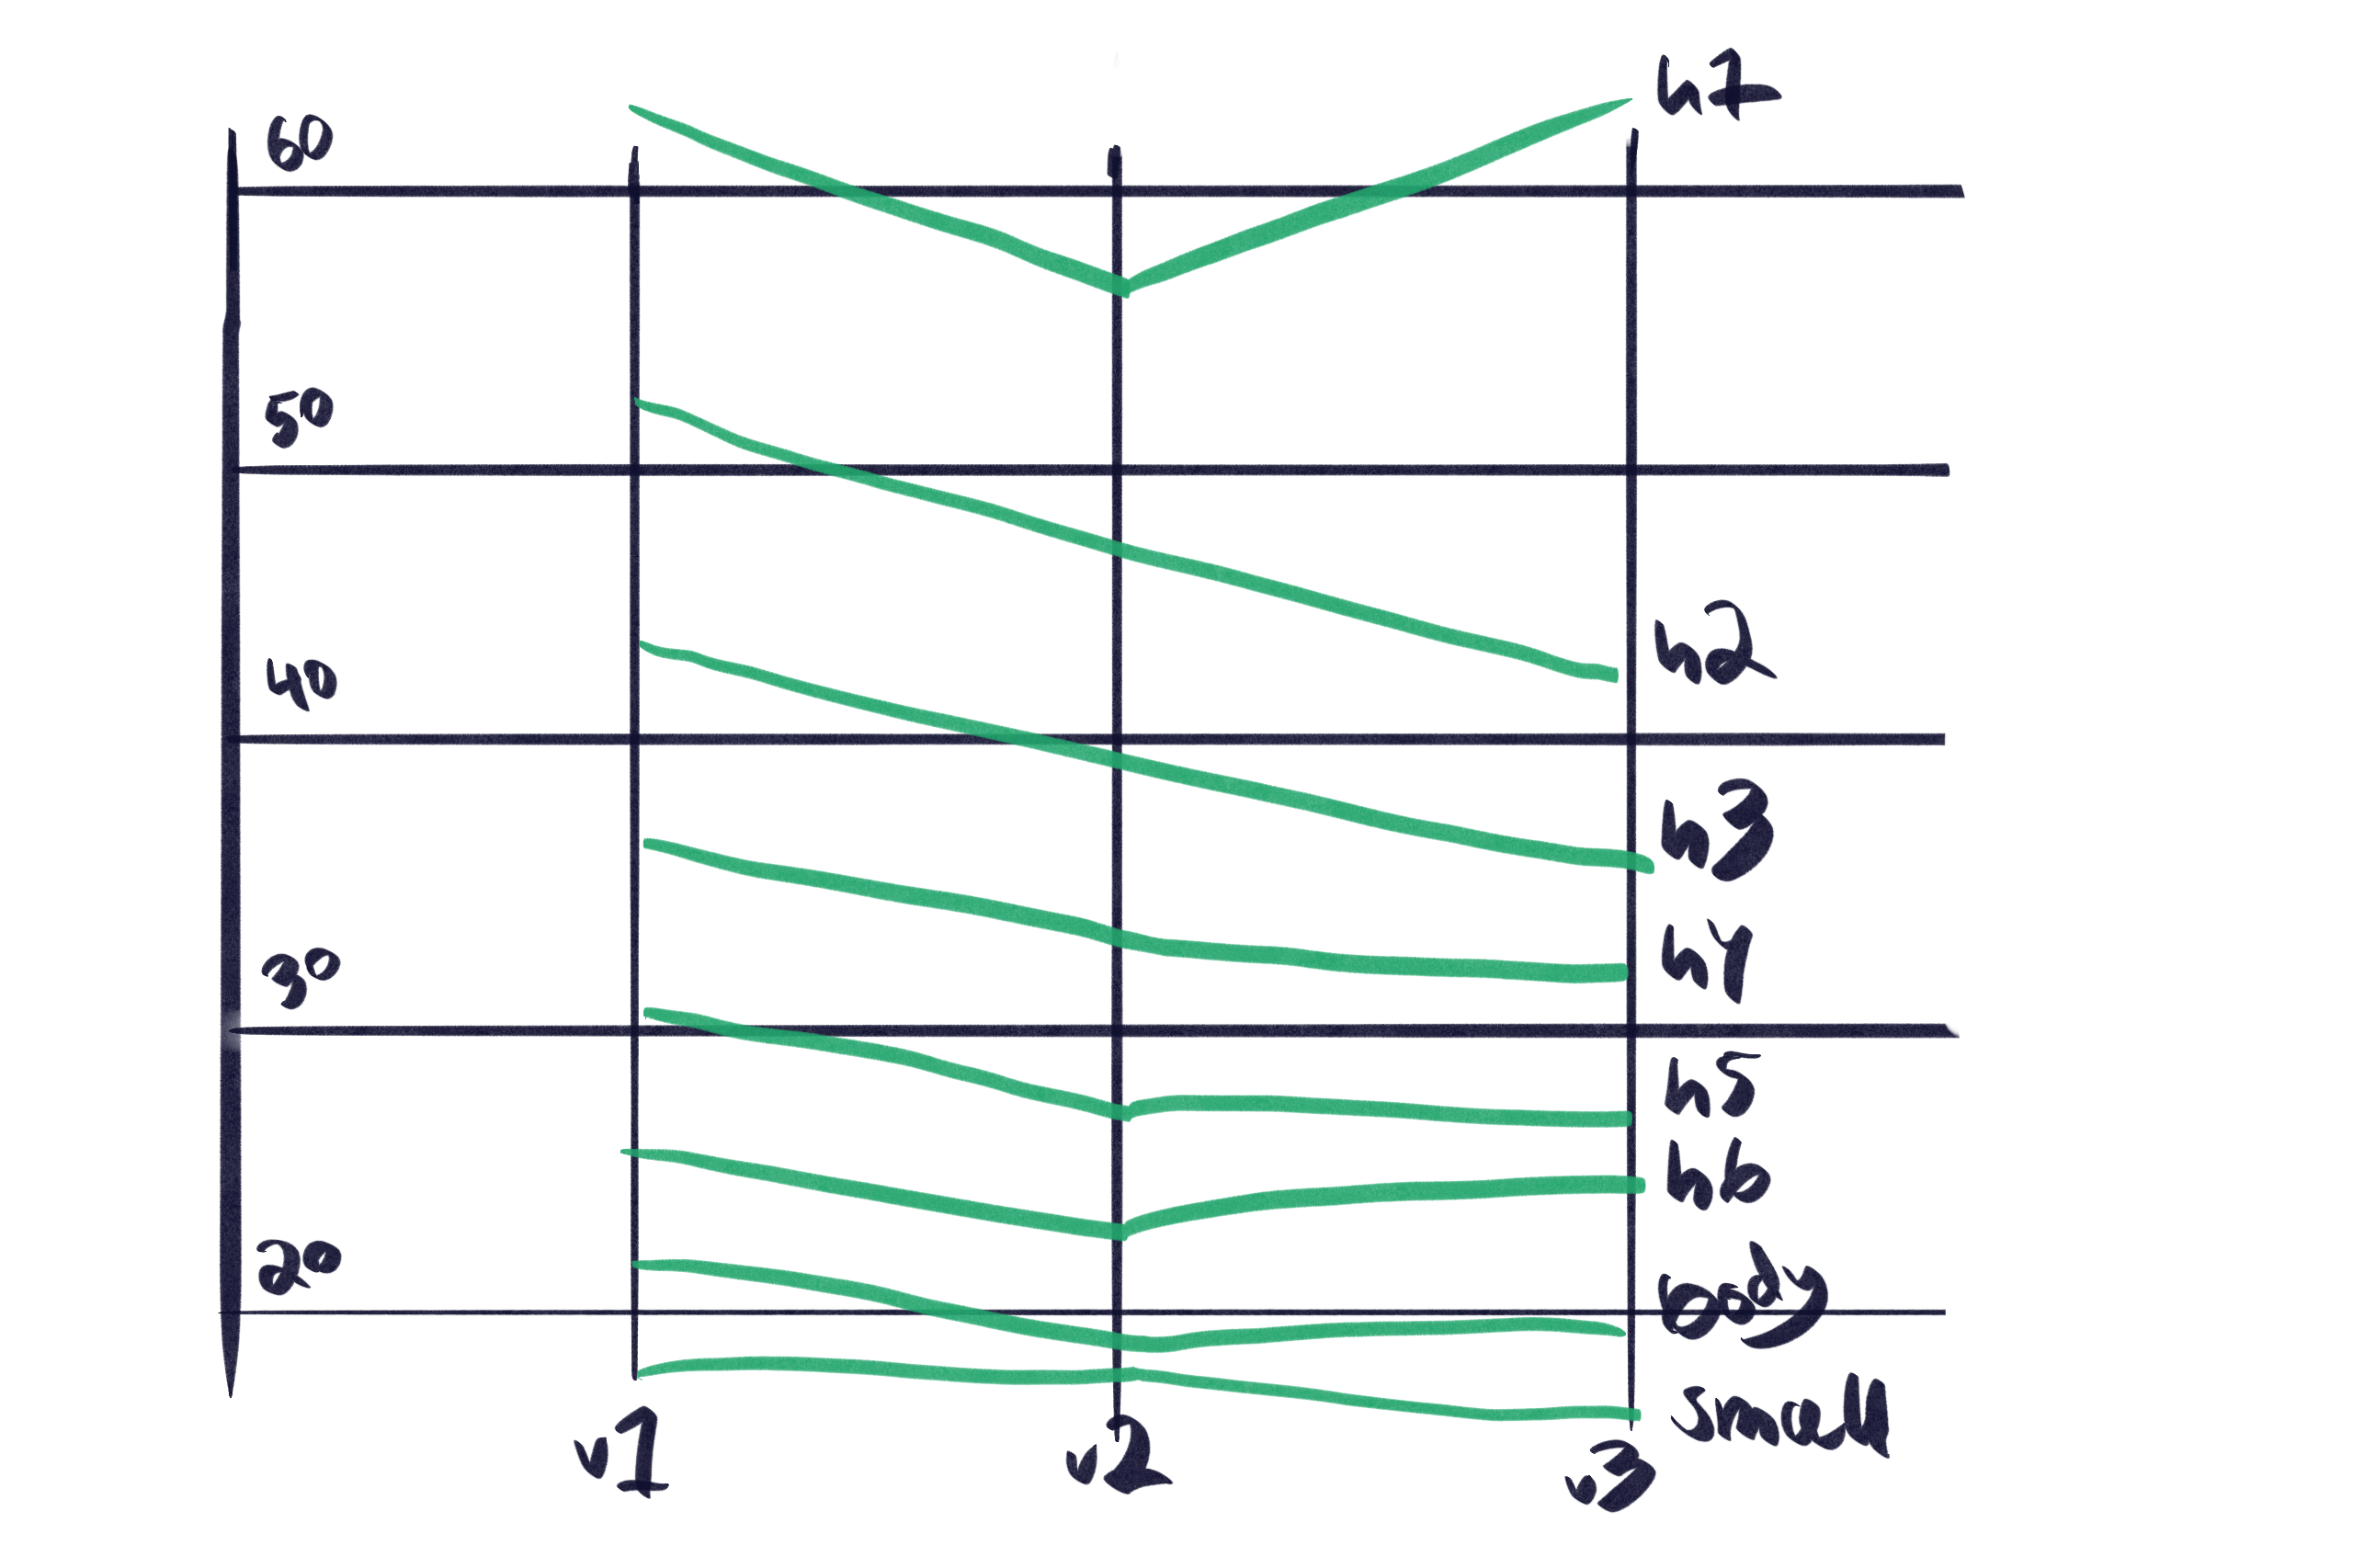 Chart showing the changing size hierarchy, from the first version to the final result where the biggest heading increases unlike the others.